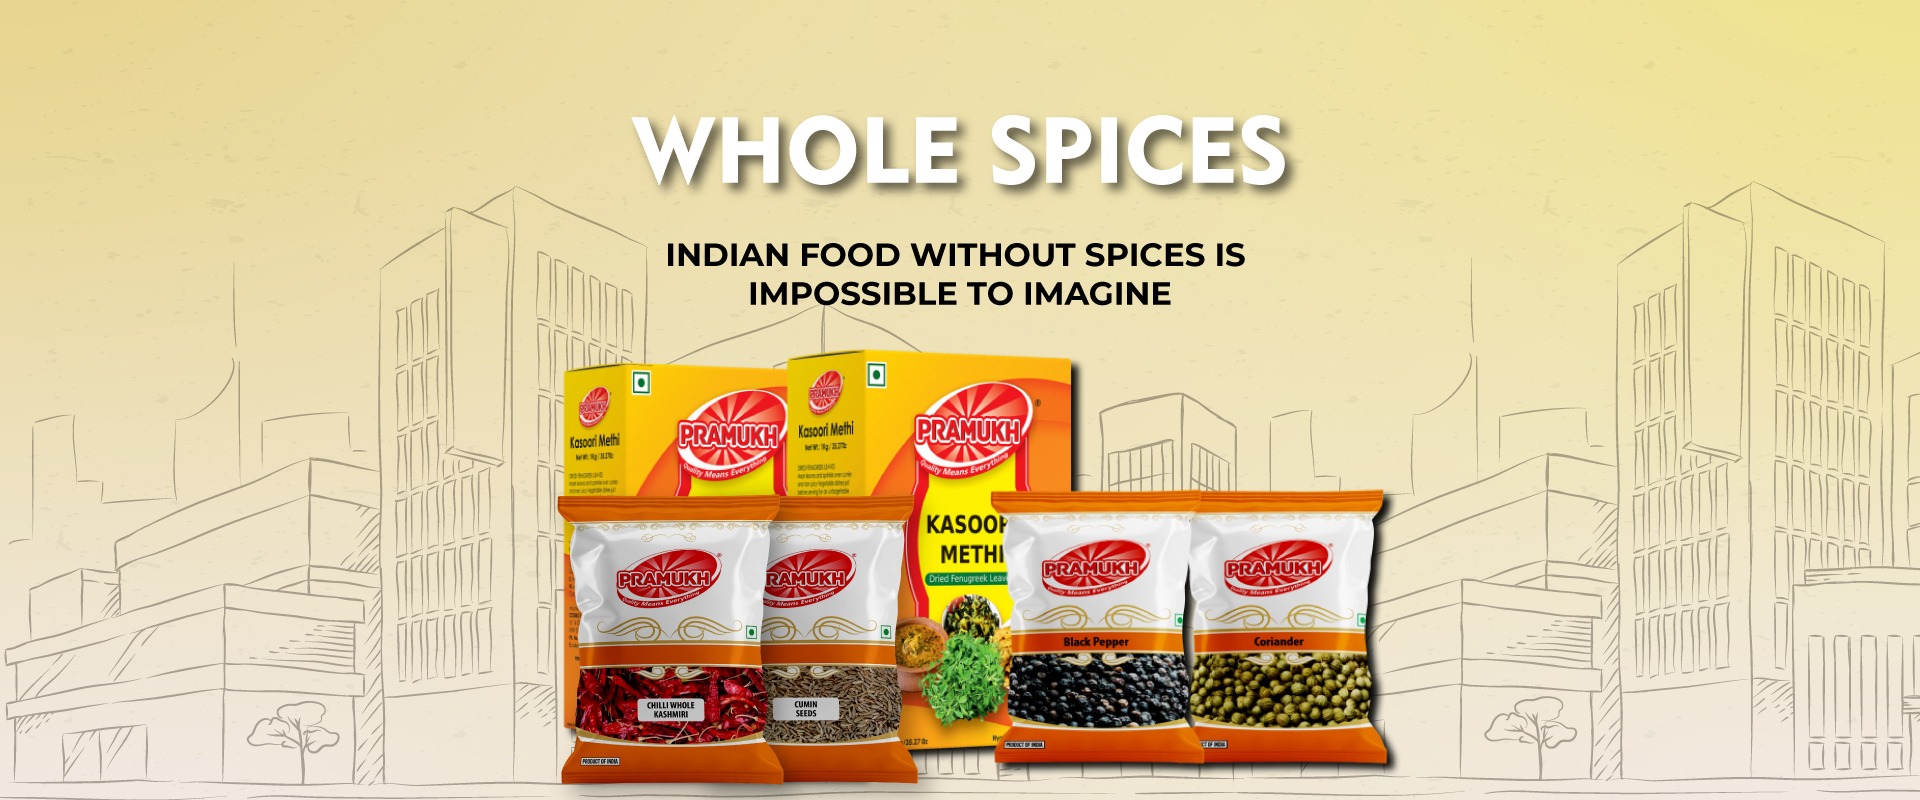 01-Whole-spices